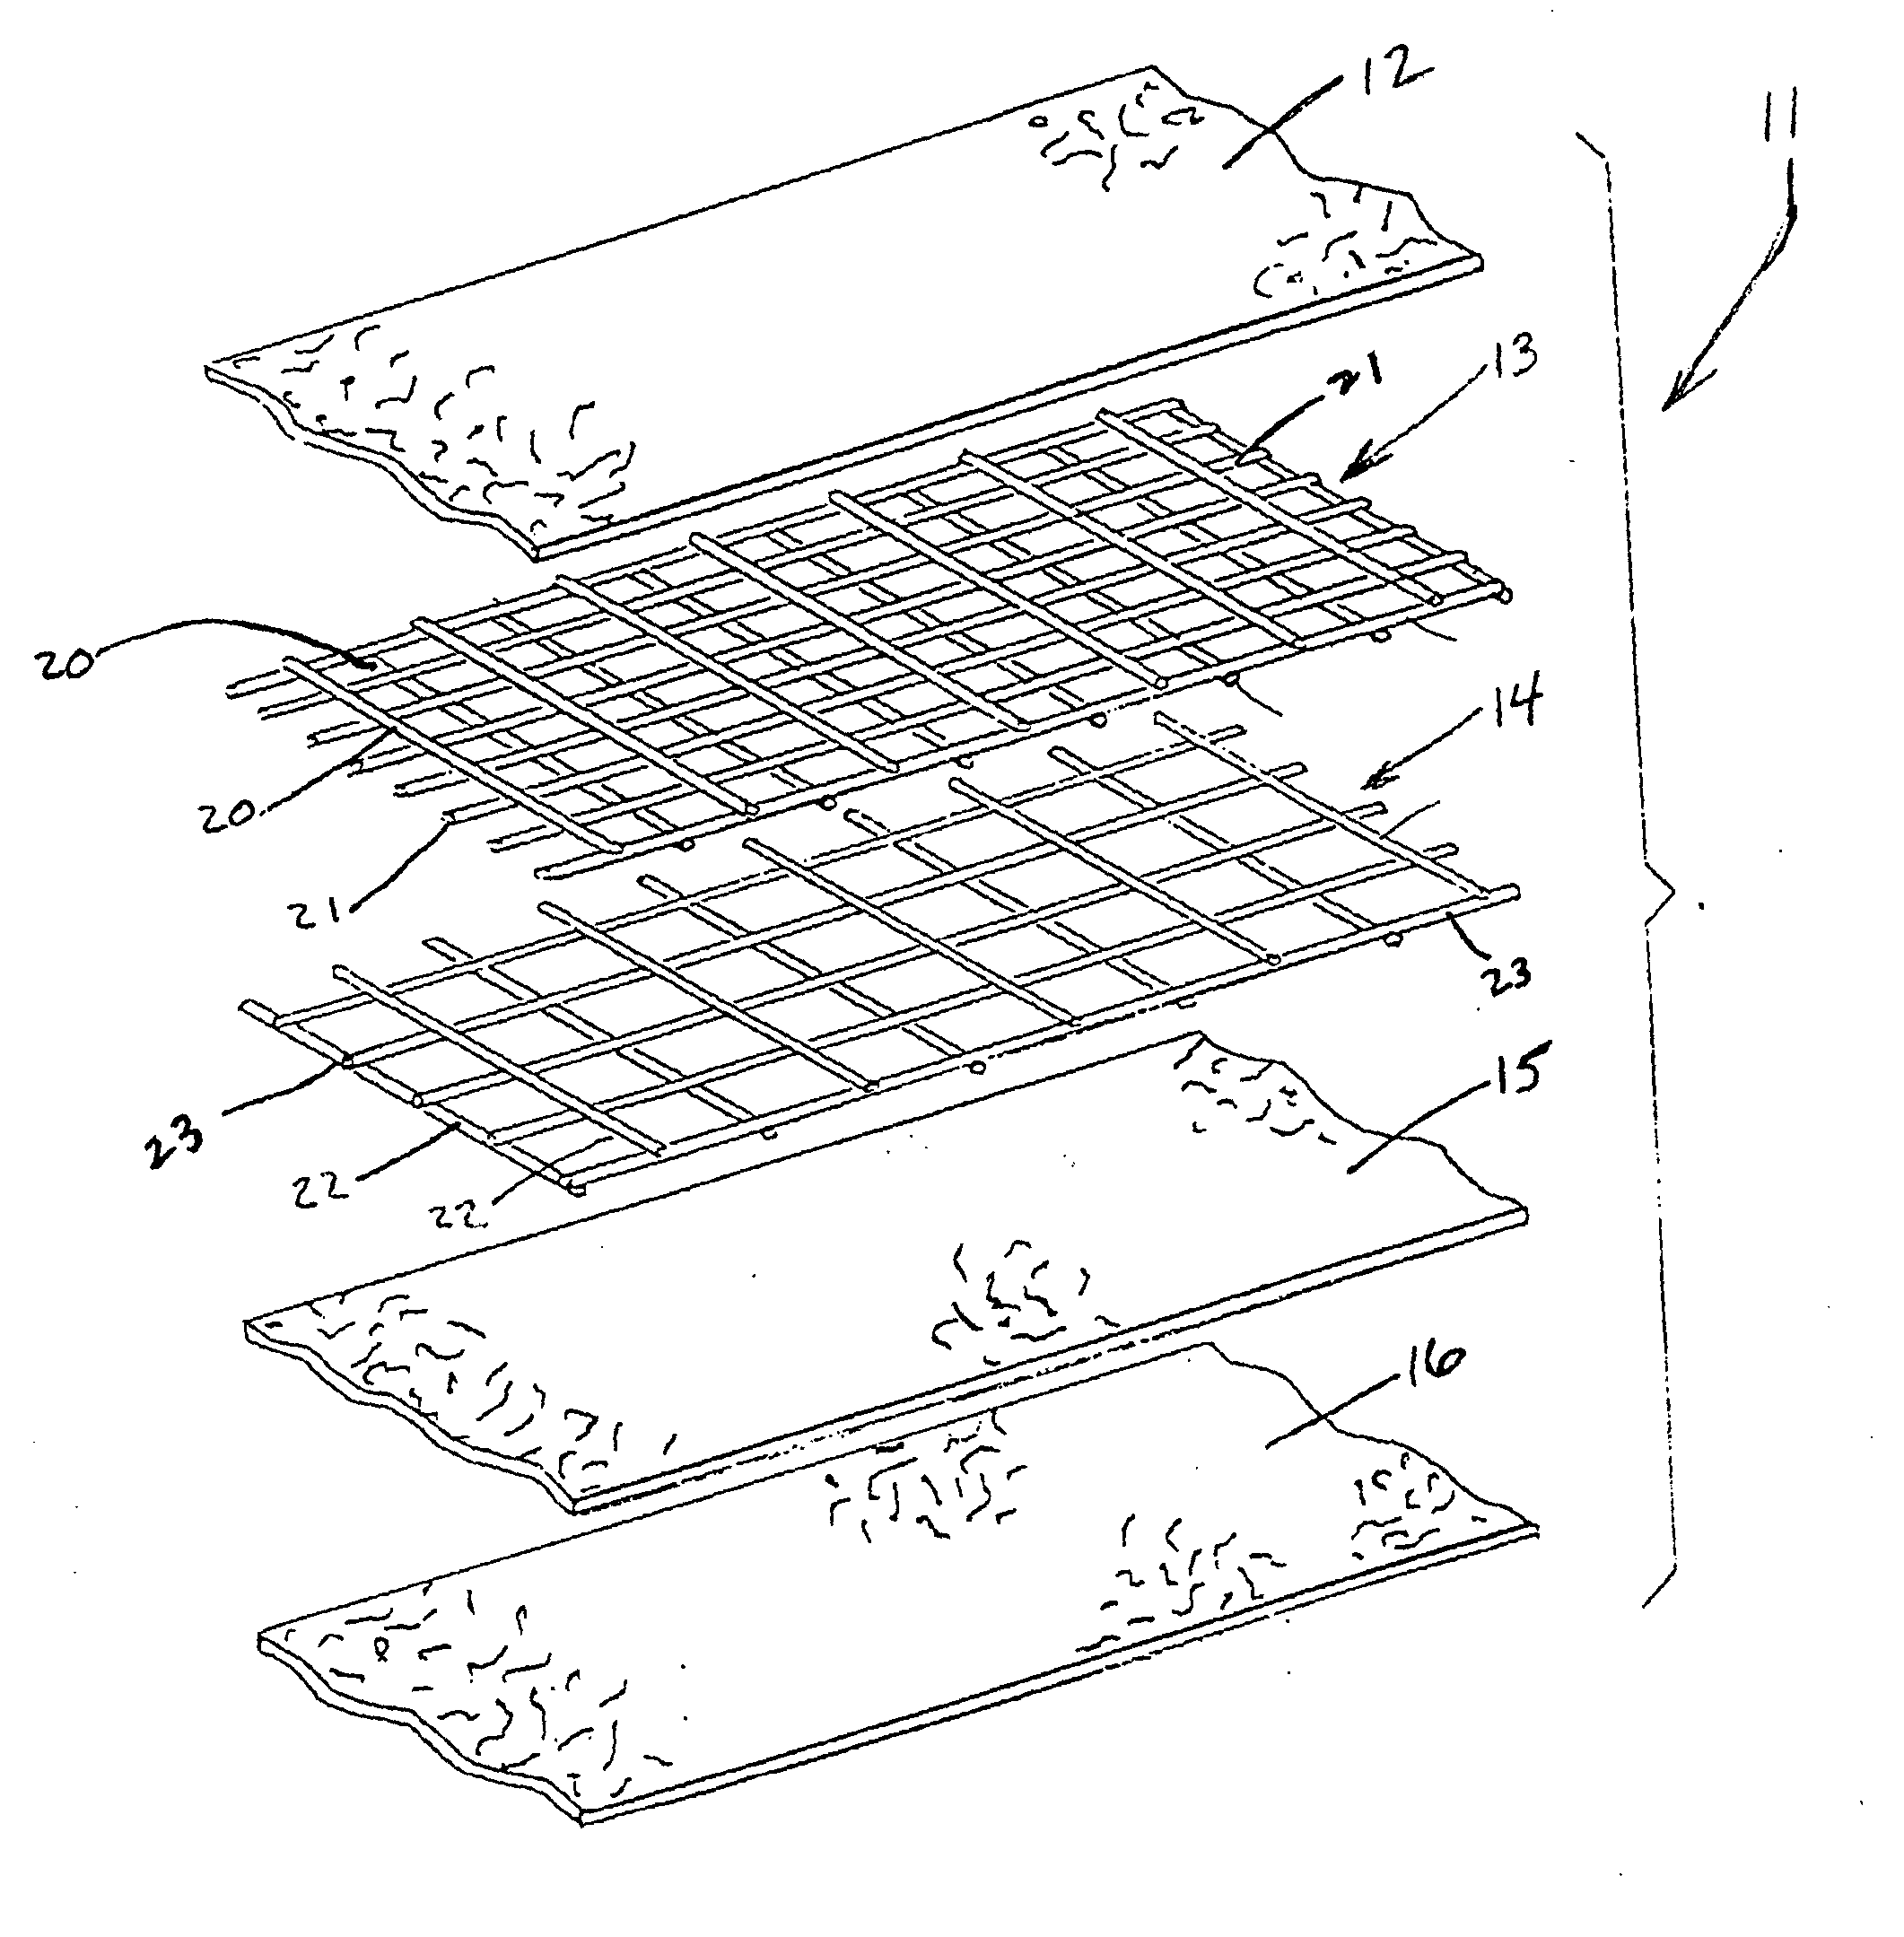 Reinforcement composite for a bituminous roofing membrane and method of making the composite